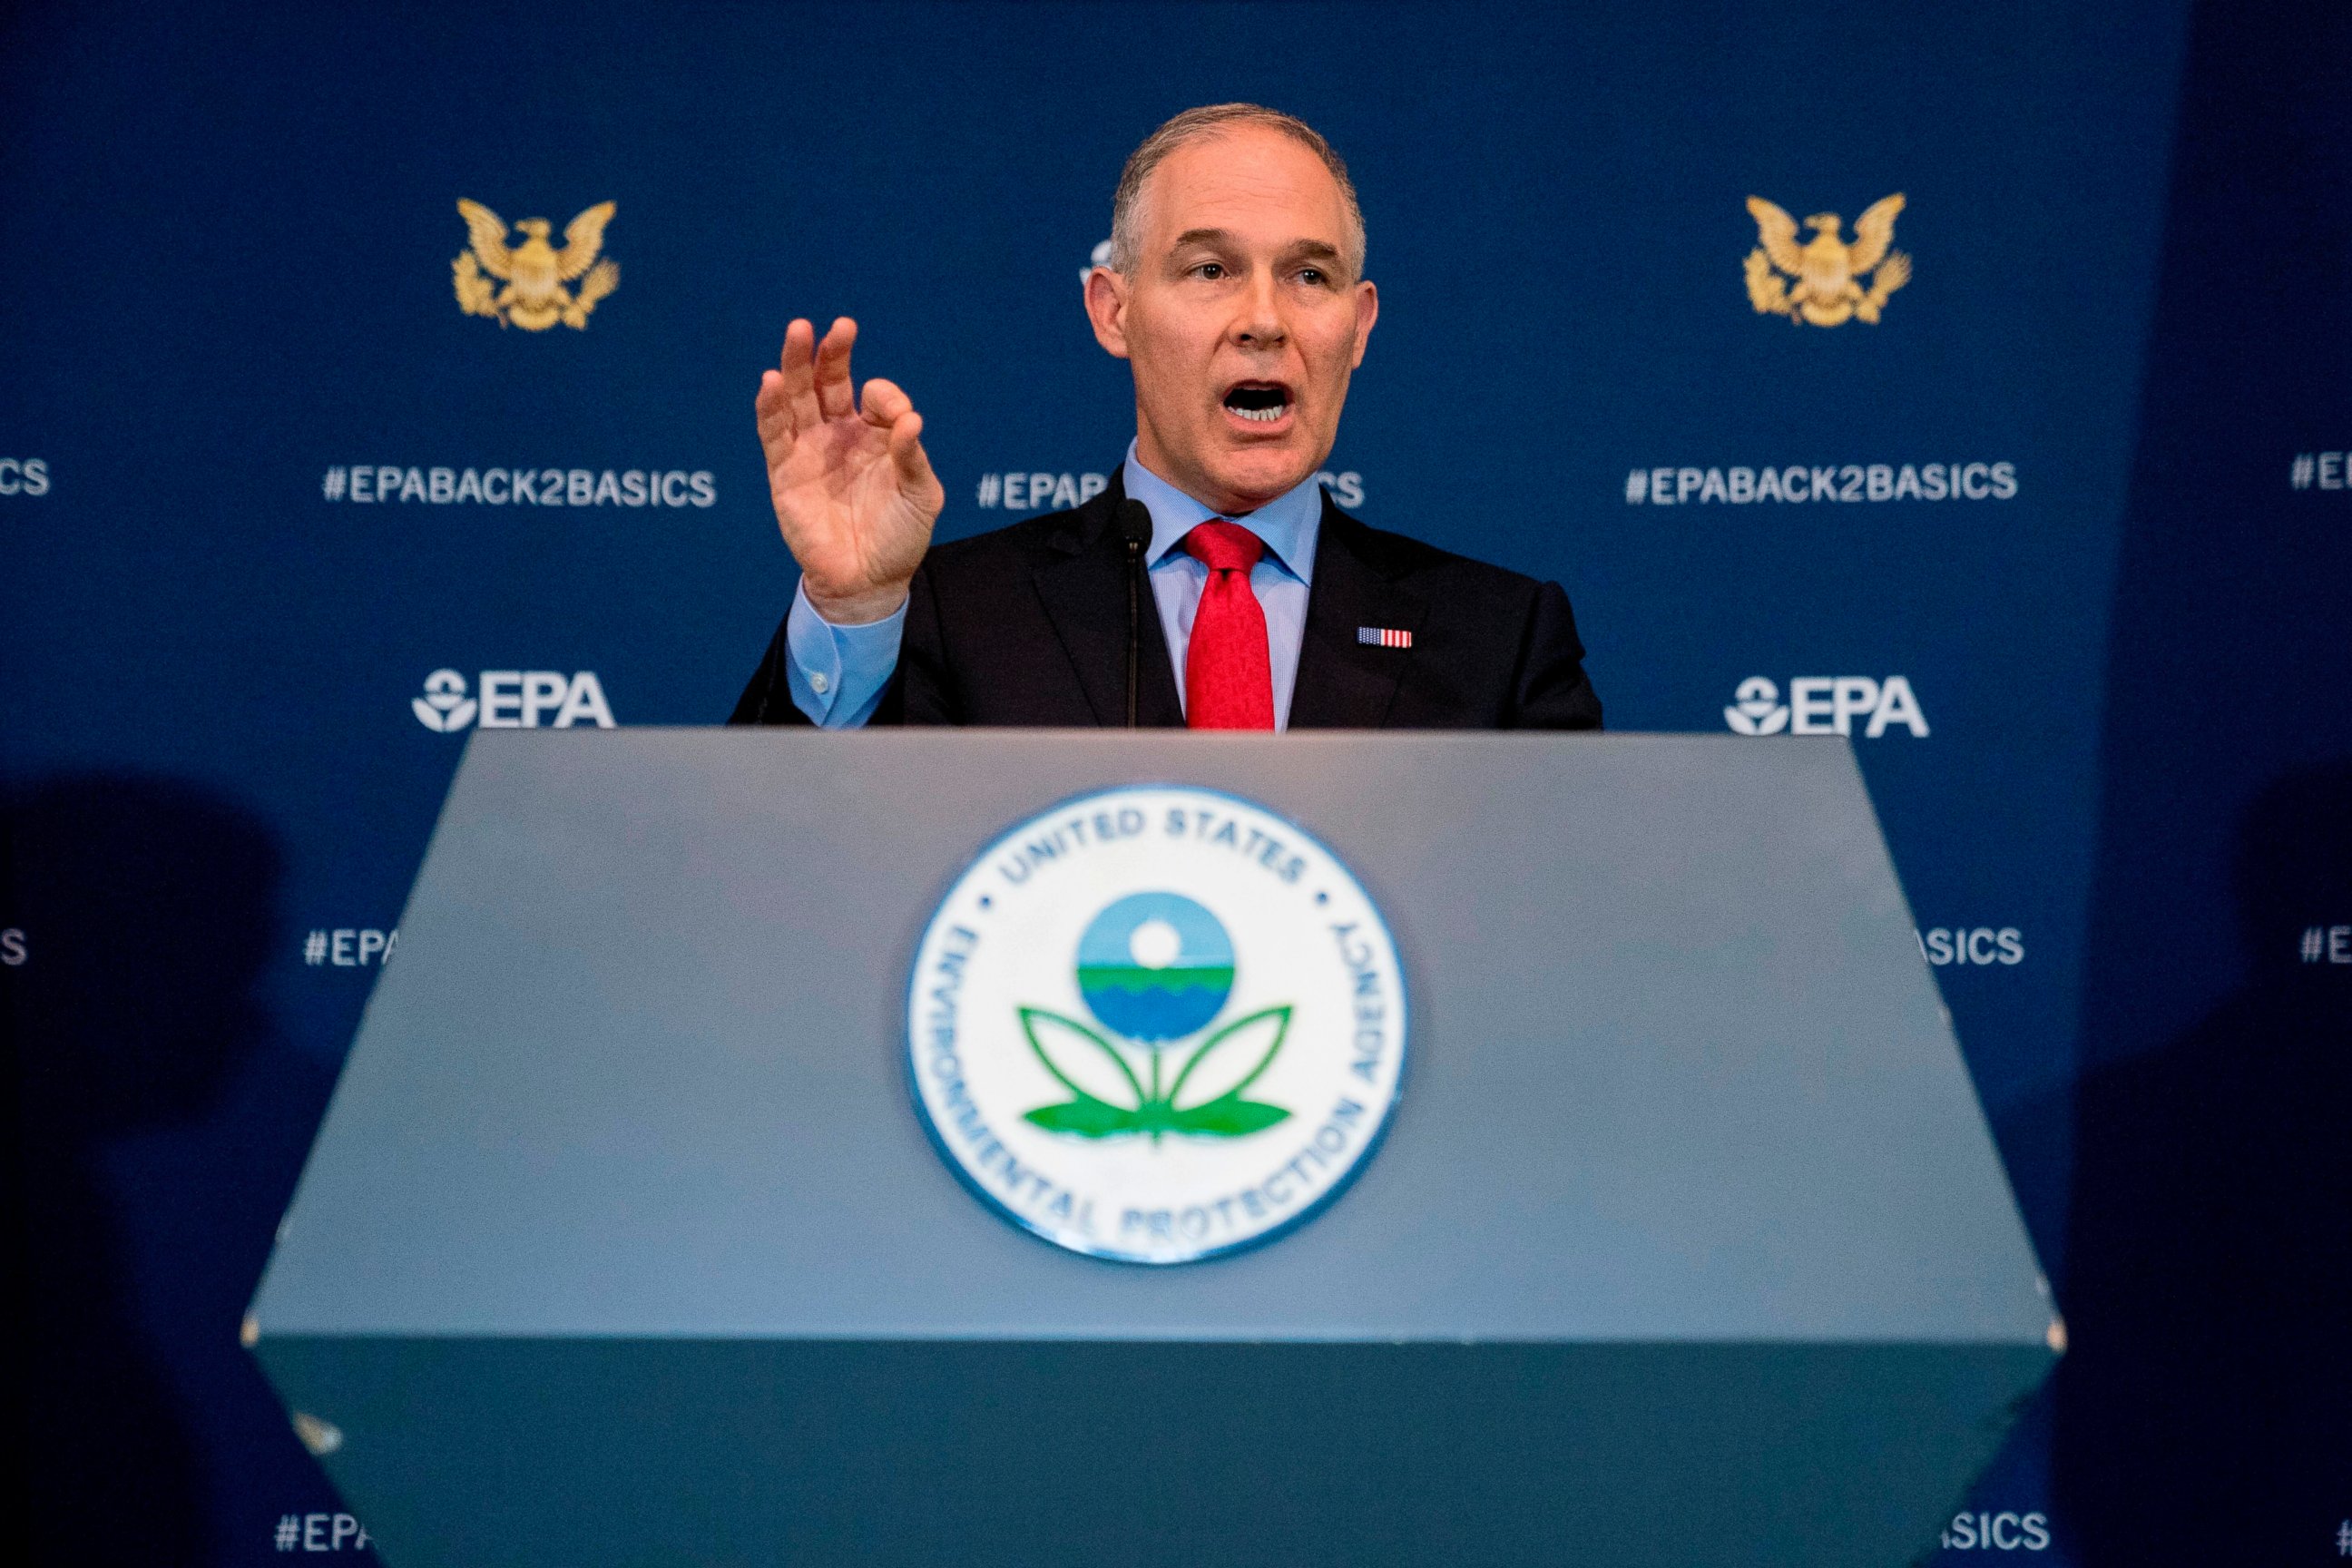 In this April 3, 2018, file photo, Environmental Protection Agency Administrator Scott Pruitt speaks at a news conference at the EPA in Washington.